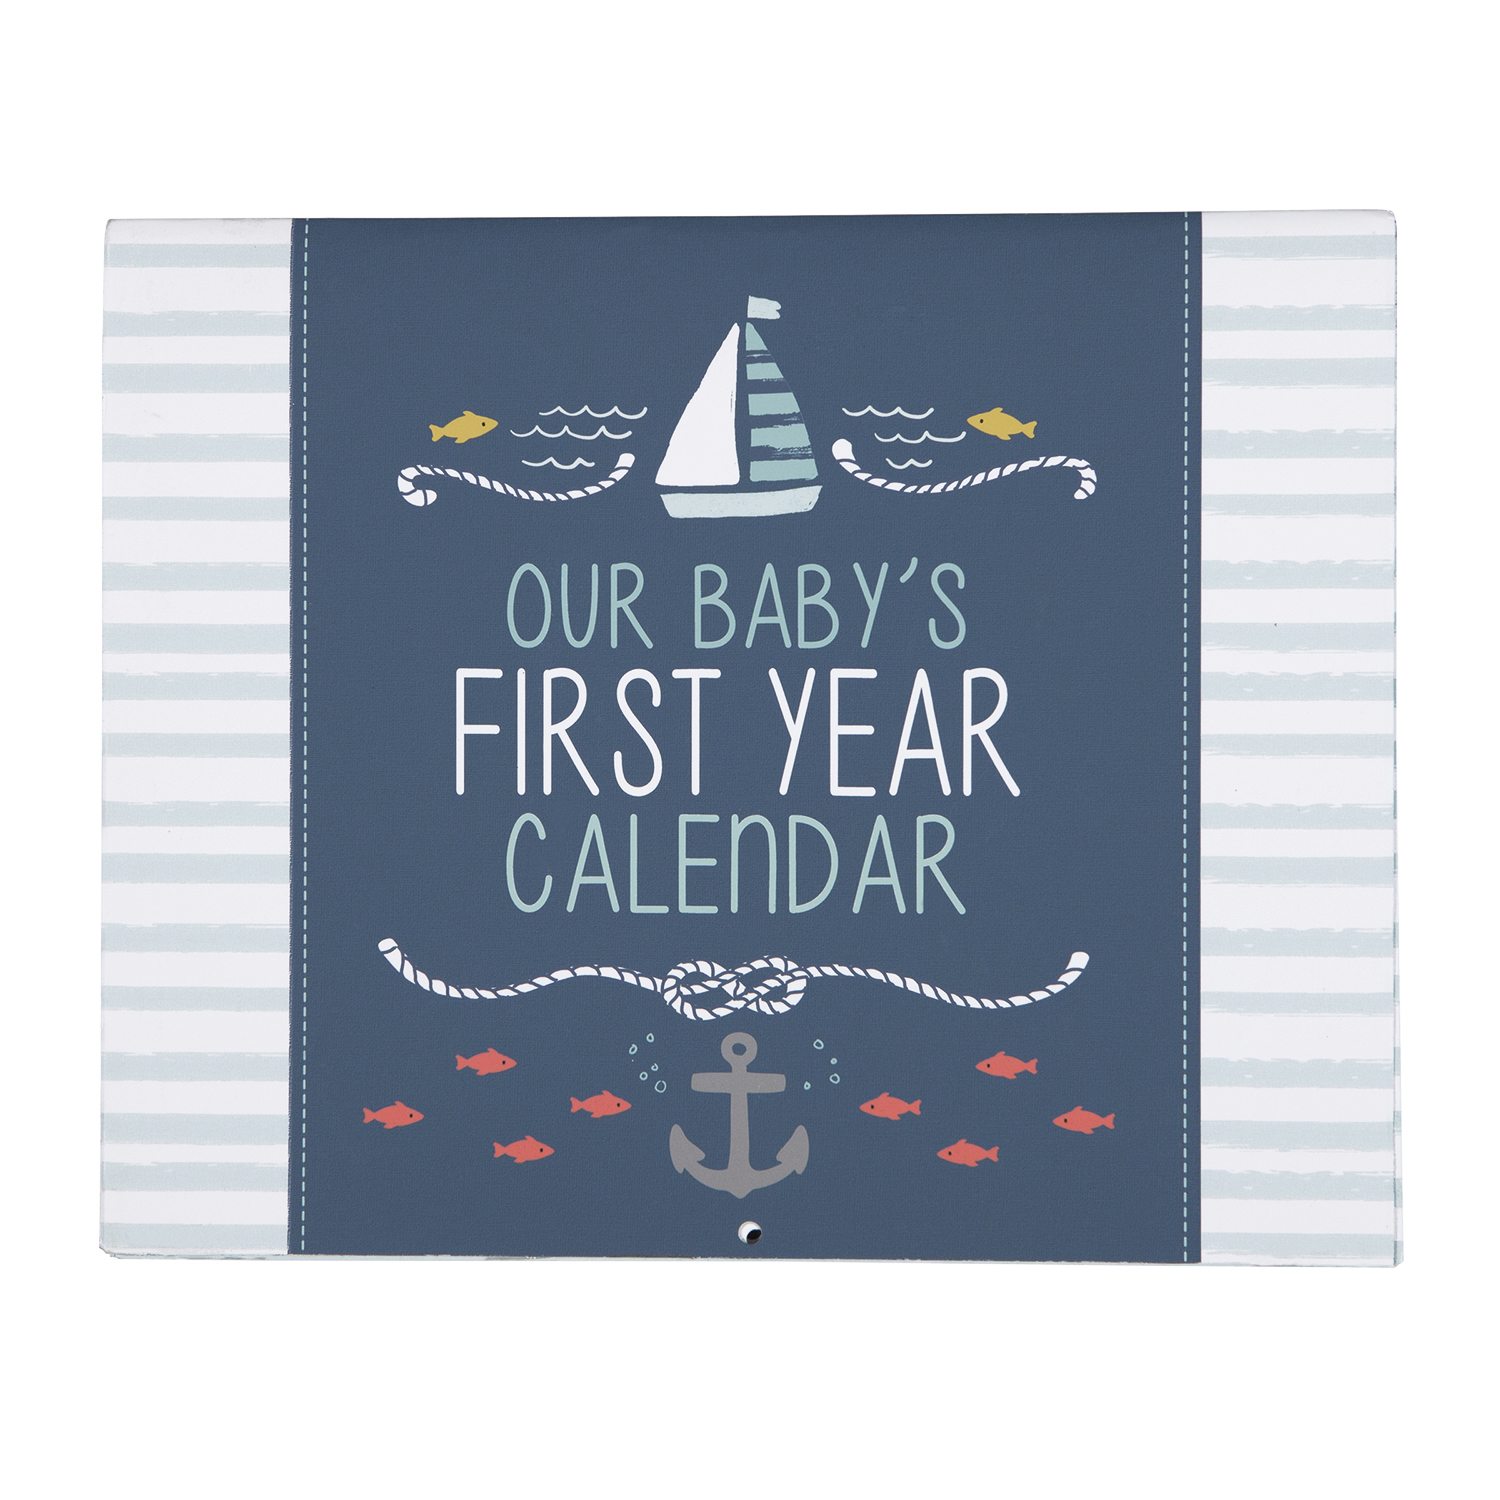 Baby’s First Year Calendar by CR Gibson